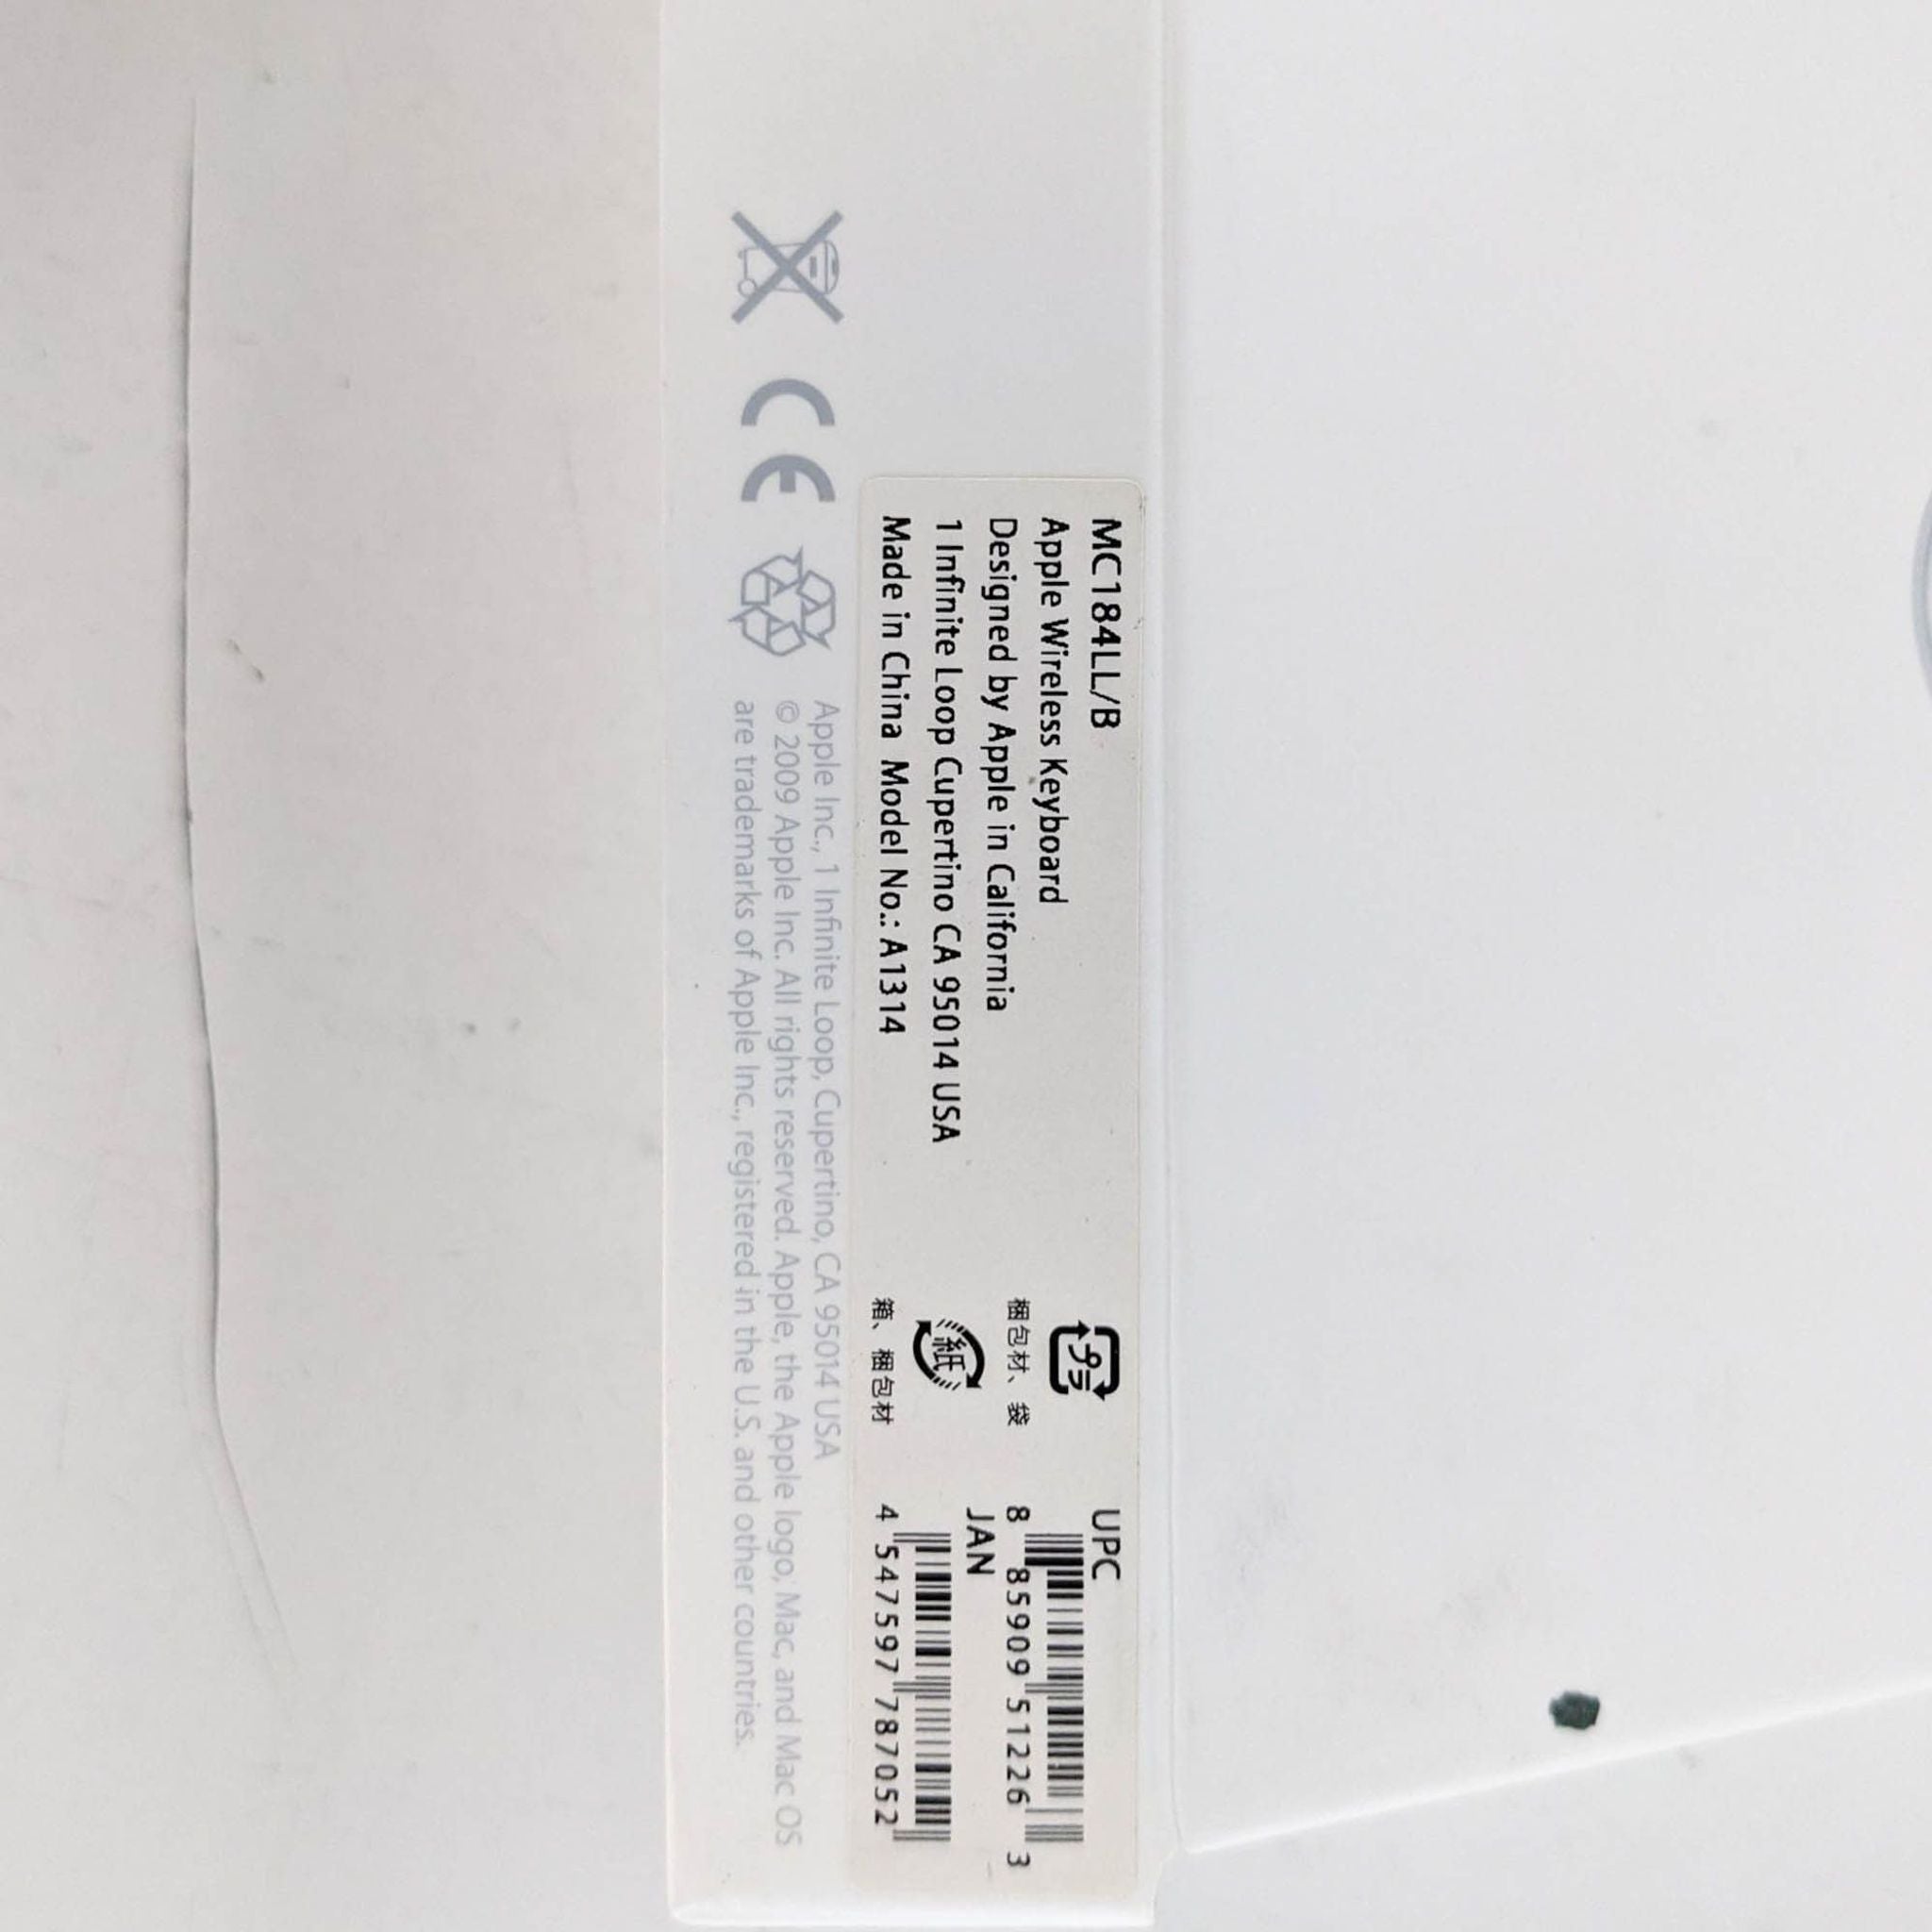 Label on an Apple product packaging with regulatory marks and a barcode, detailing product identification and compliance.